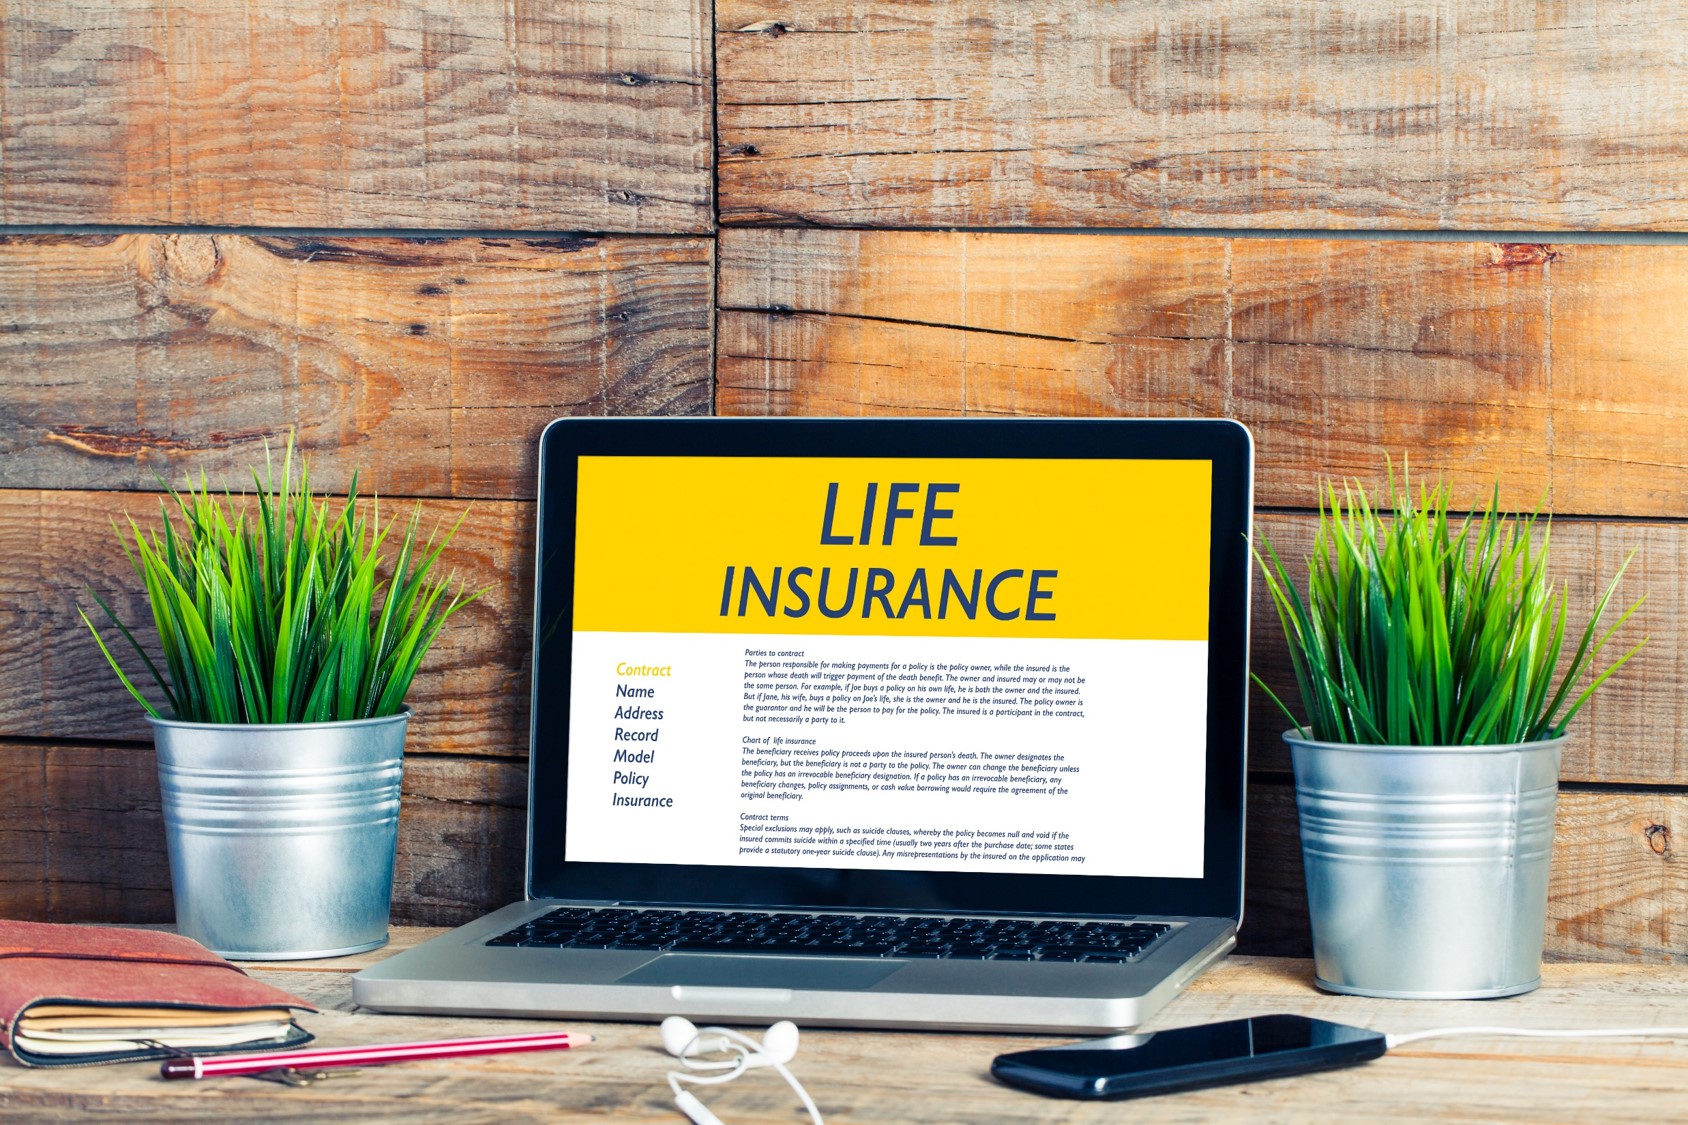 What People Overlook When Shopping for Life Insurance